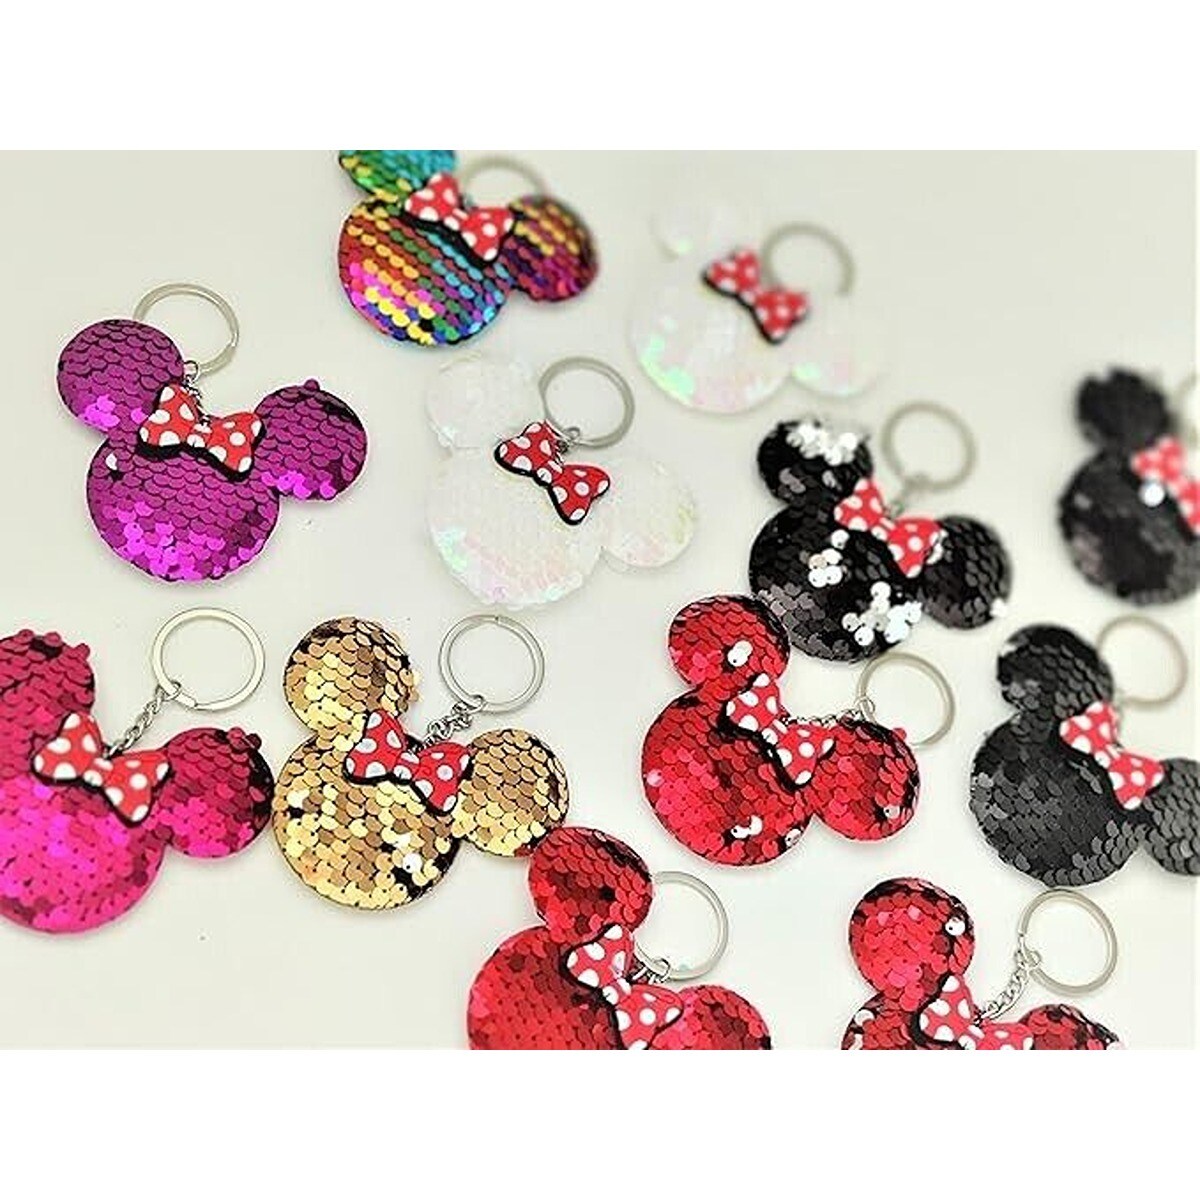 3 Inches Sparkling Minnie Mouse Plush Reversible Sequin Key Chain